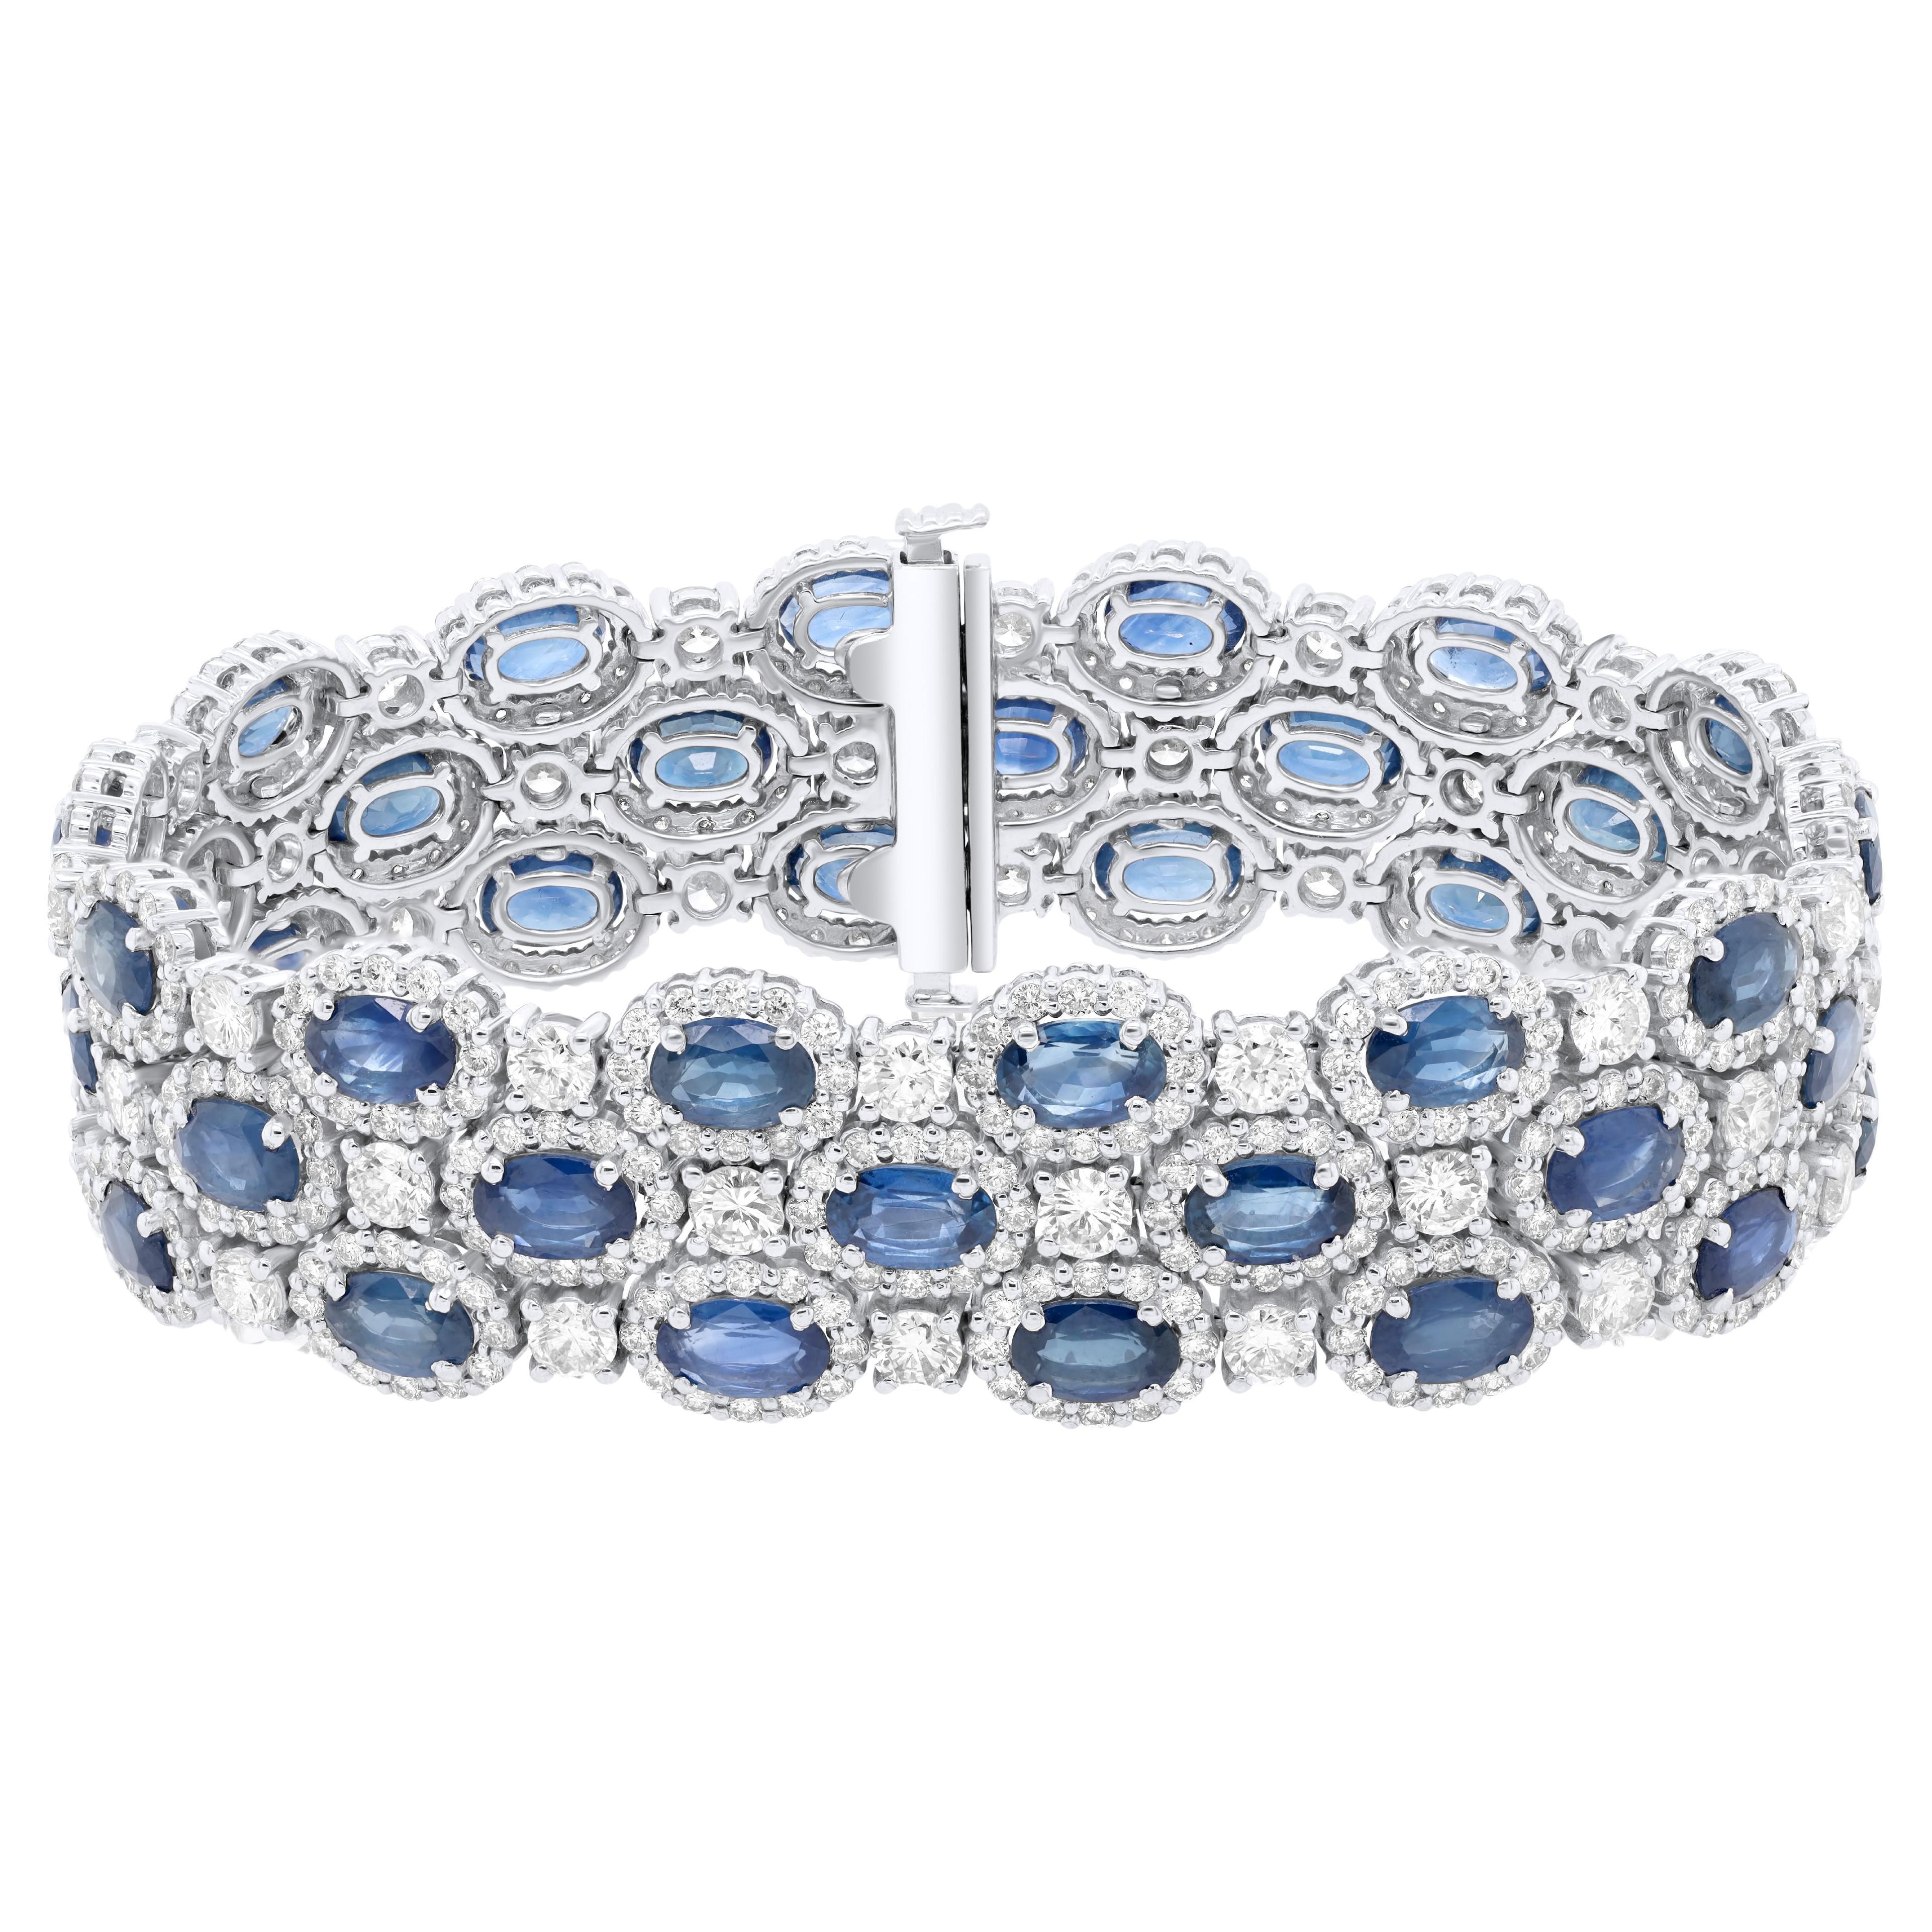 Diana M. 22.91 Carat Sapphire and 11.64 Carat Diamond Bracelet in White Gold For Sale